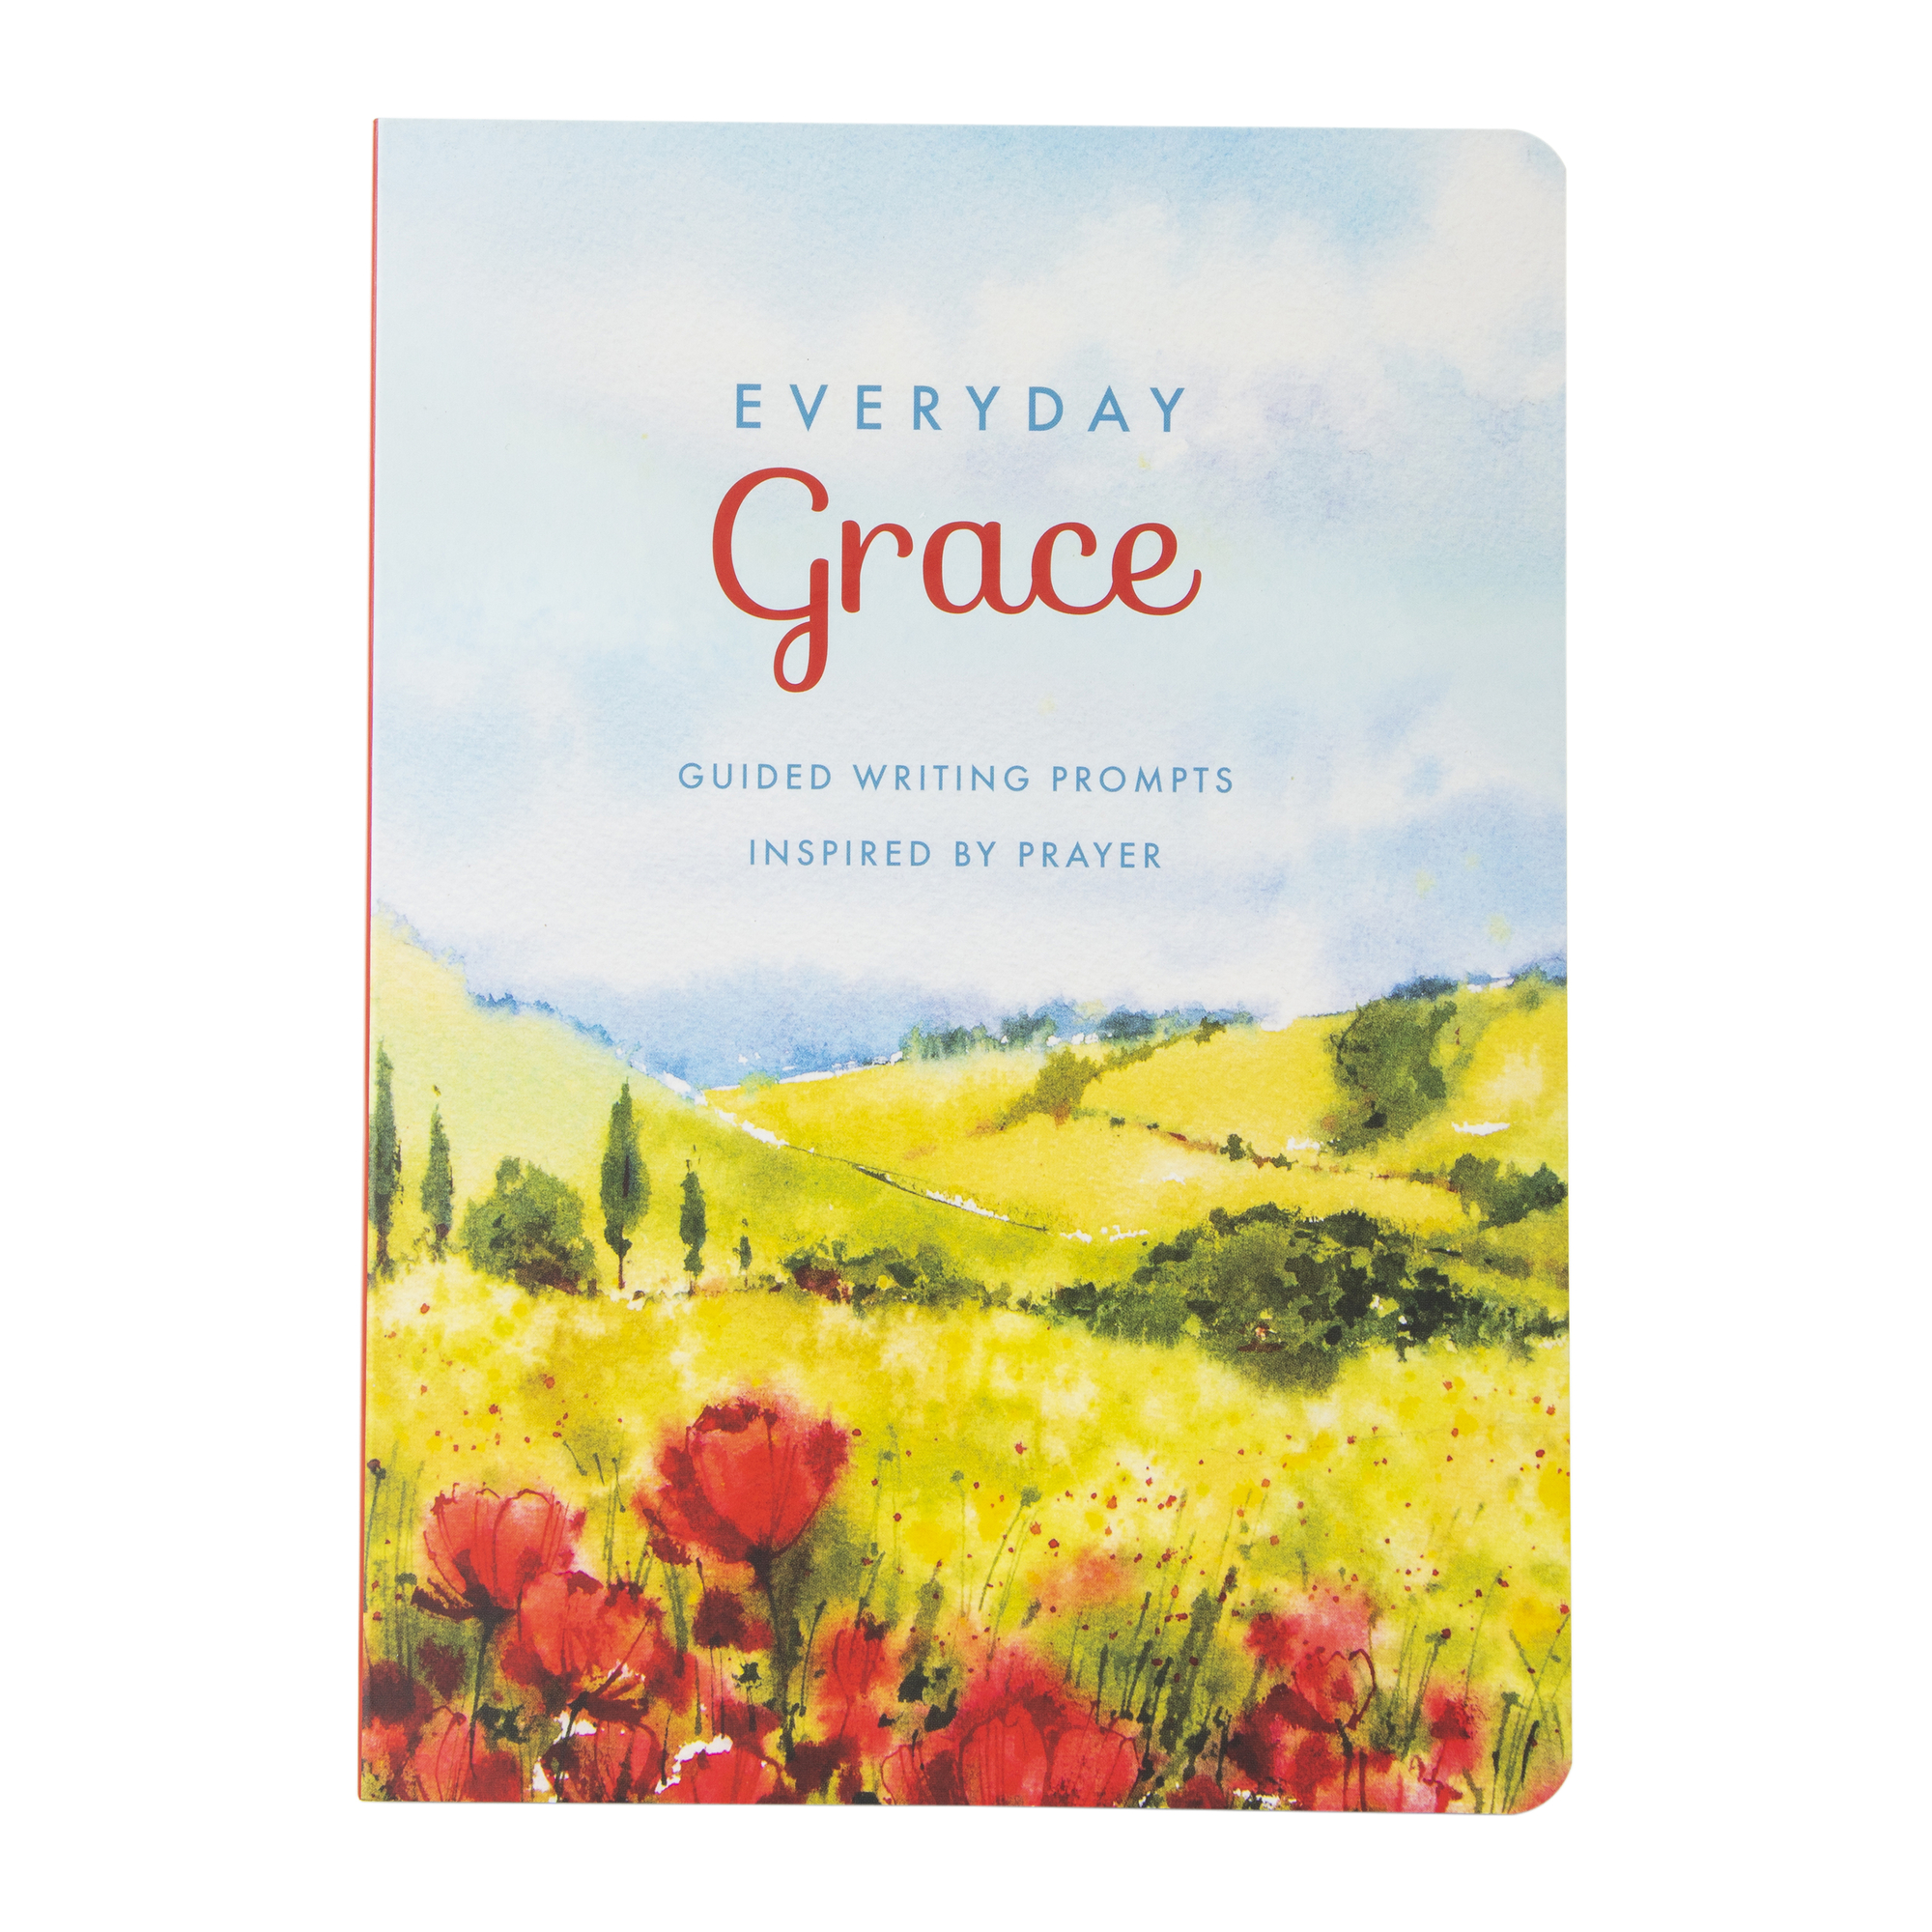 'everyday grace' guided writing prompts inspired by prayer